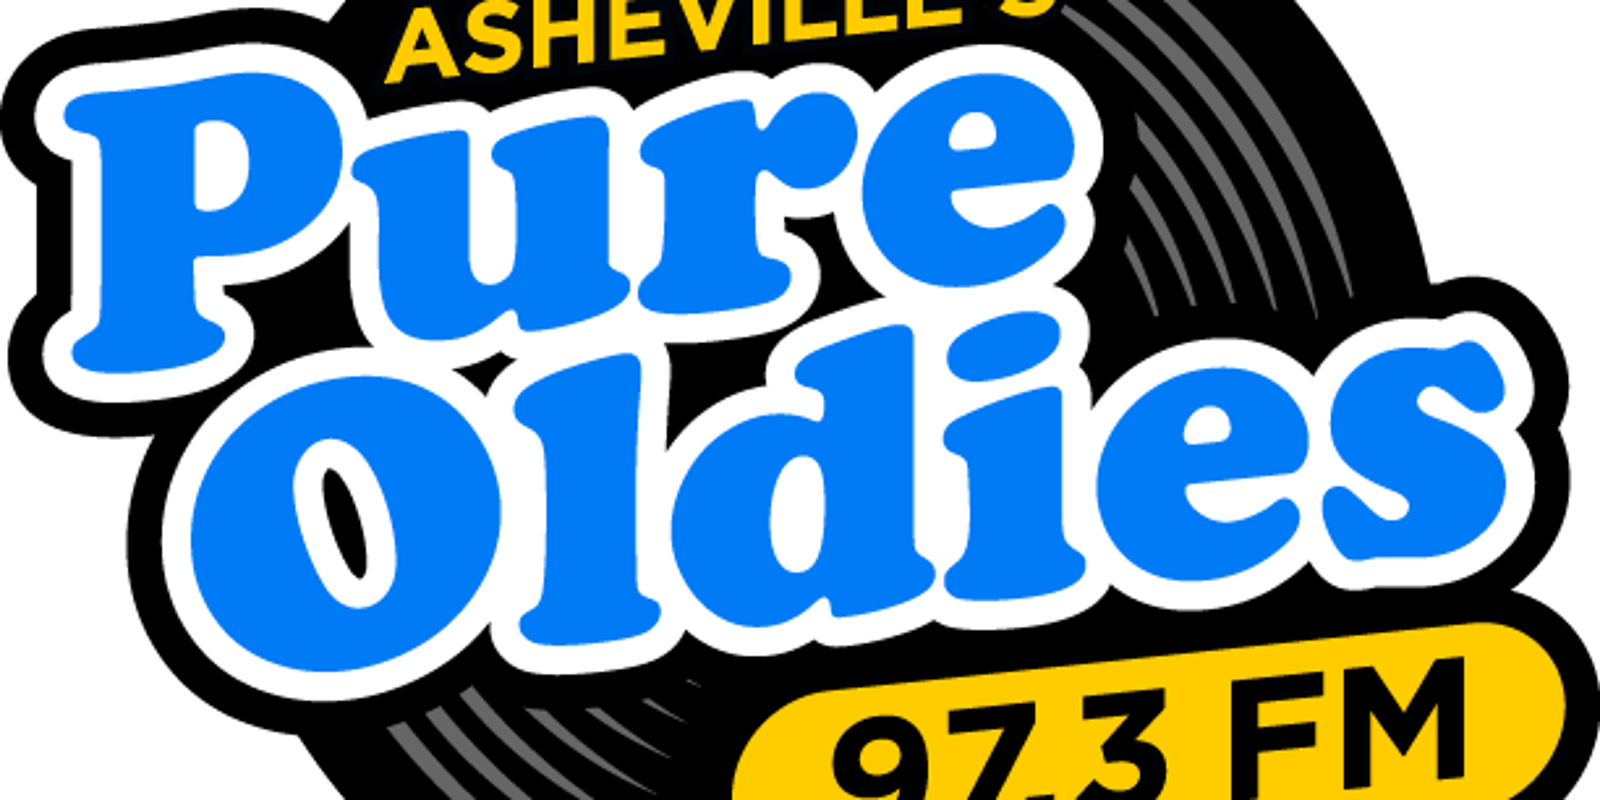 New Asheville oldies radio station, playing The Beatles and